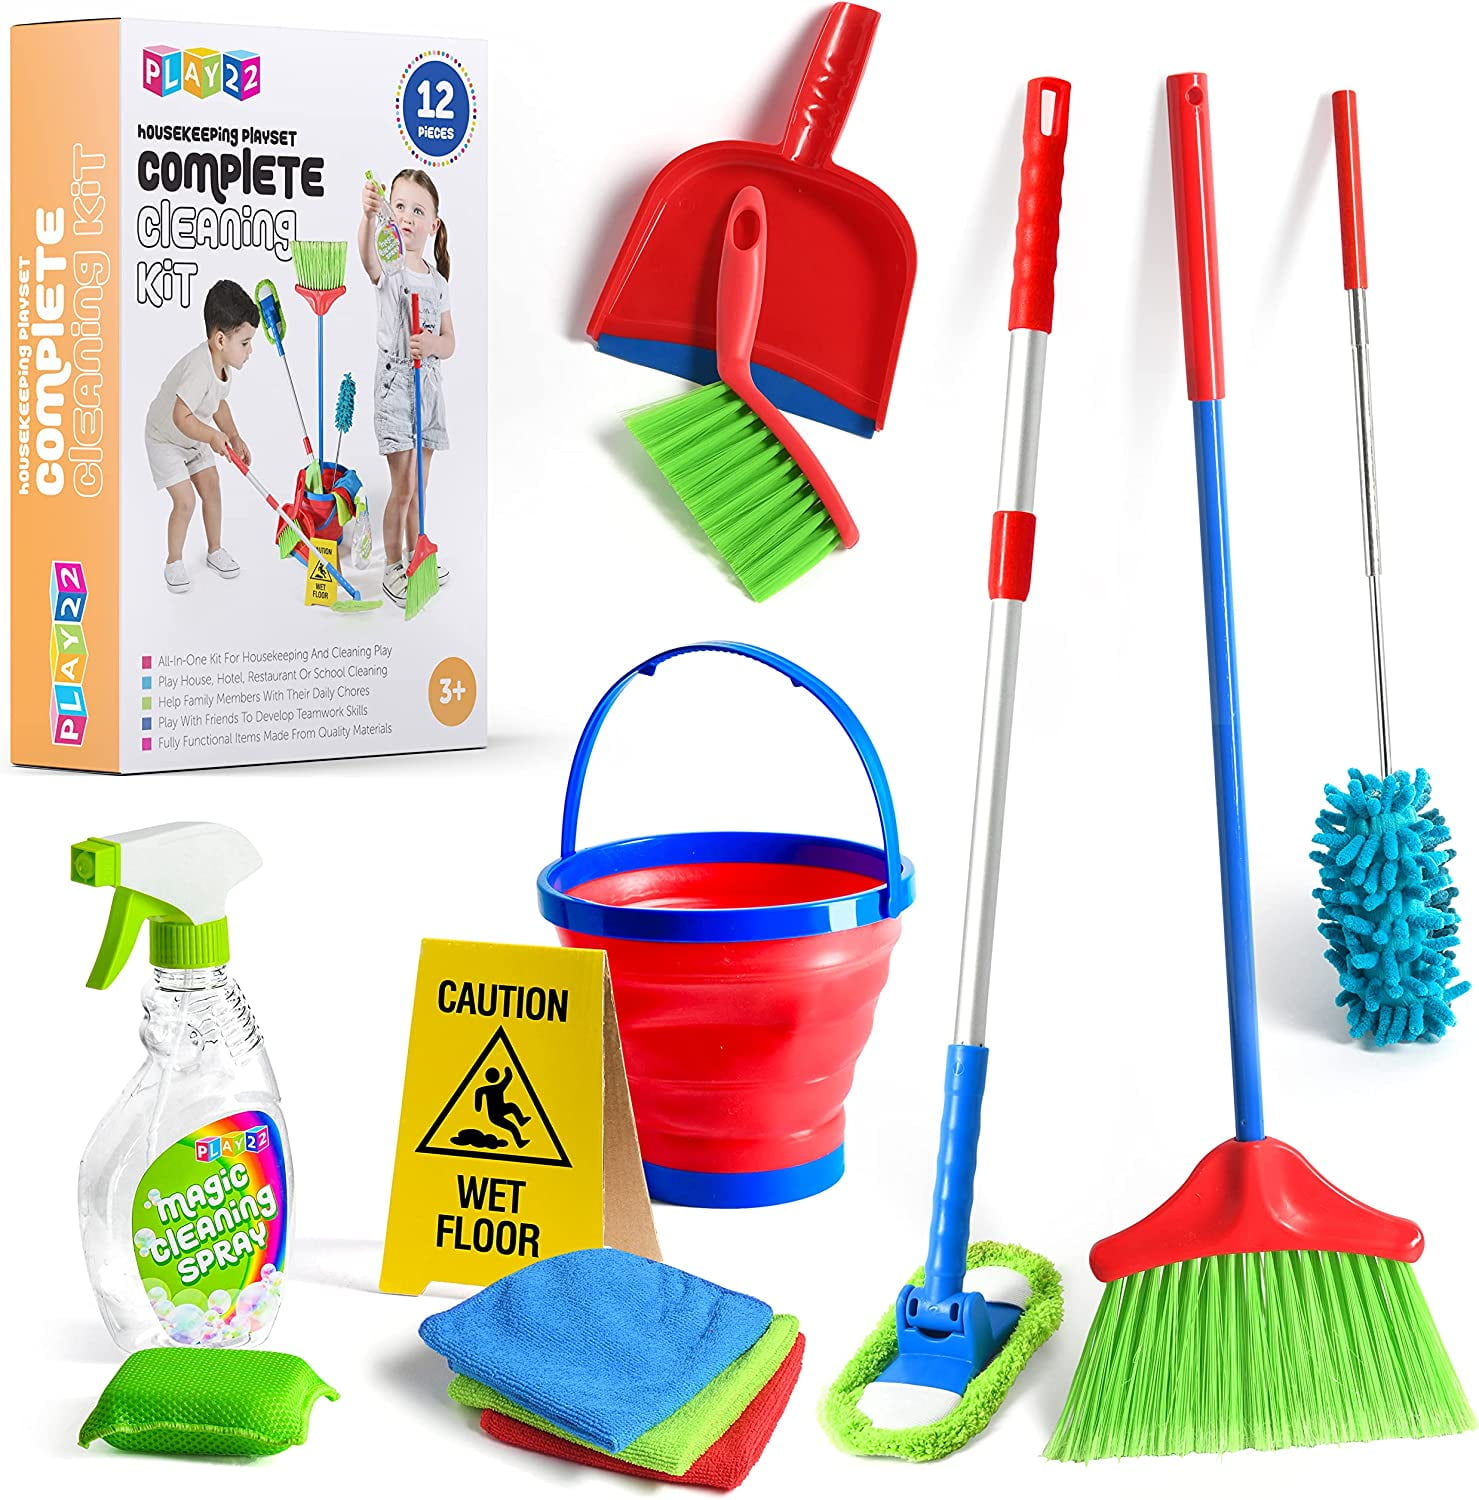 SDJMa Kids Cleaning Set 10 Piece - Toy Cleaning Set Includes Broom, Mop,  Brush, Dust Pan, Soap, Sponge, Spray, Bucket, - Toy Kitchen Toddler Cleaning  Set 